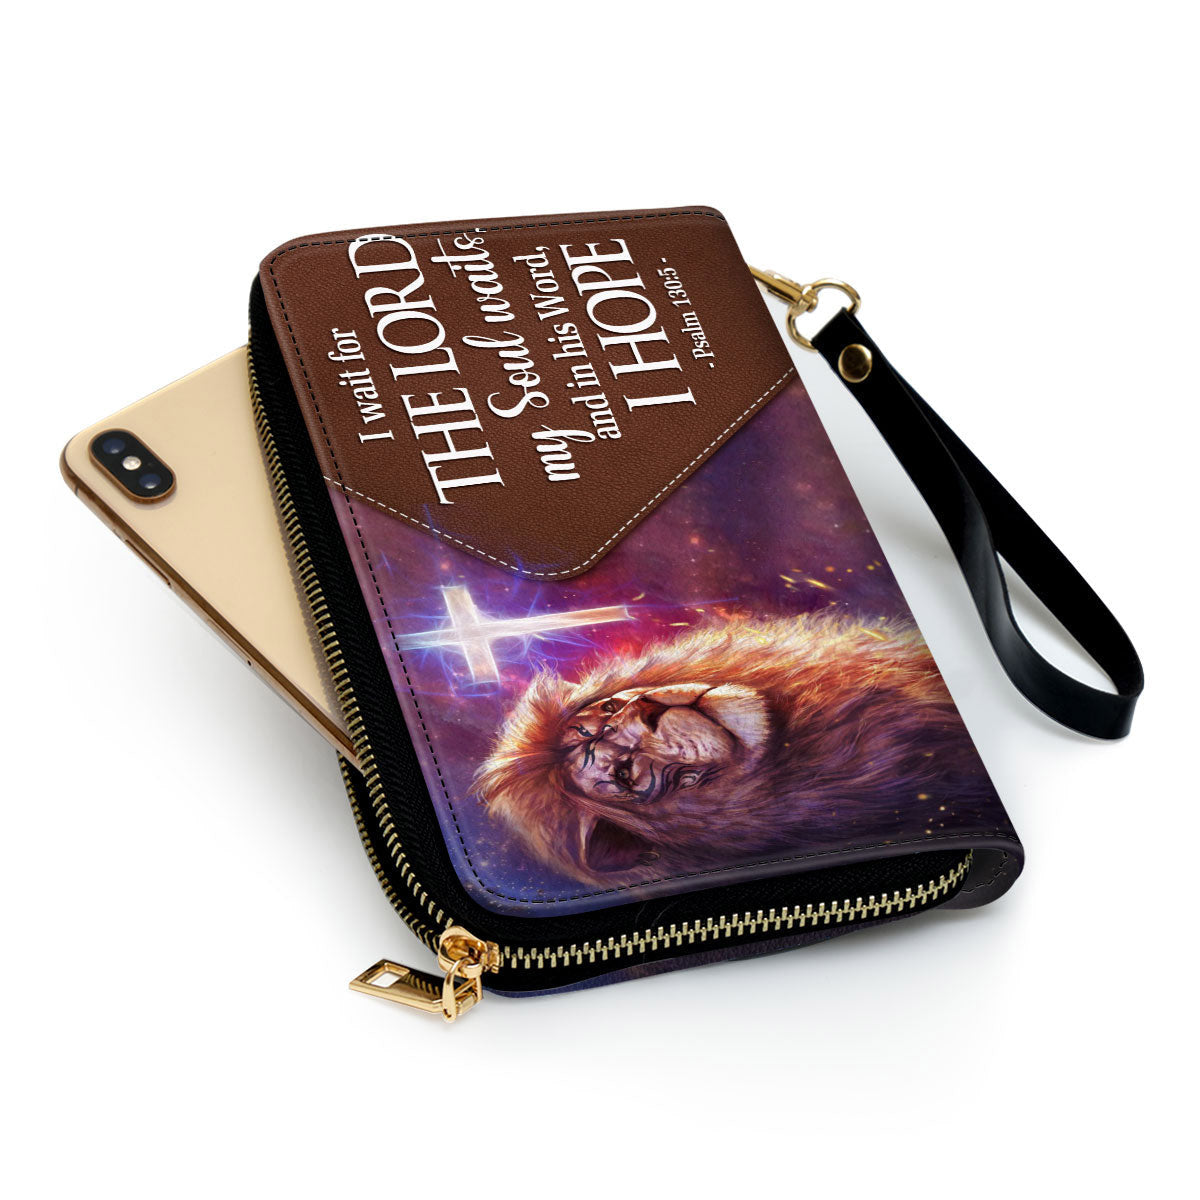 With Wristlet Strap Handle Psalm 1305 Lion And Cross Christ Gift For Religious Woman Clutch Purse For Women - Personalized Name